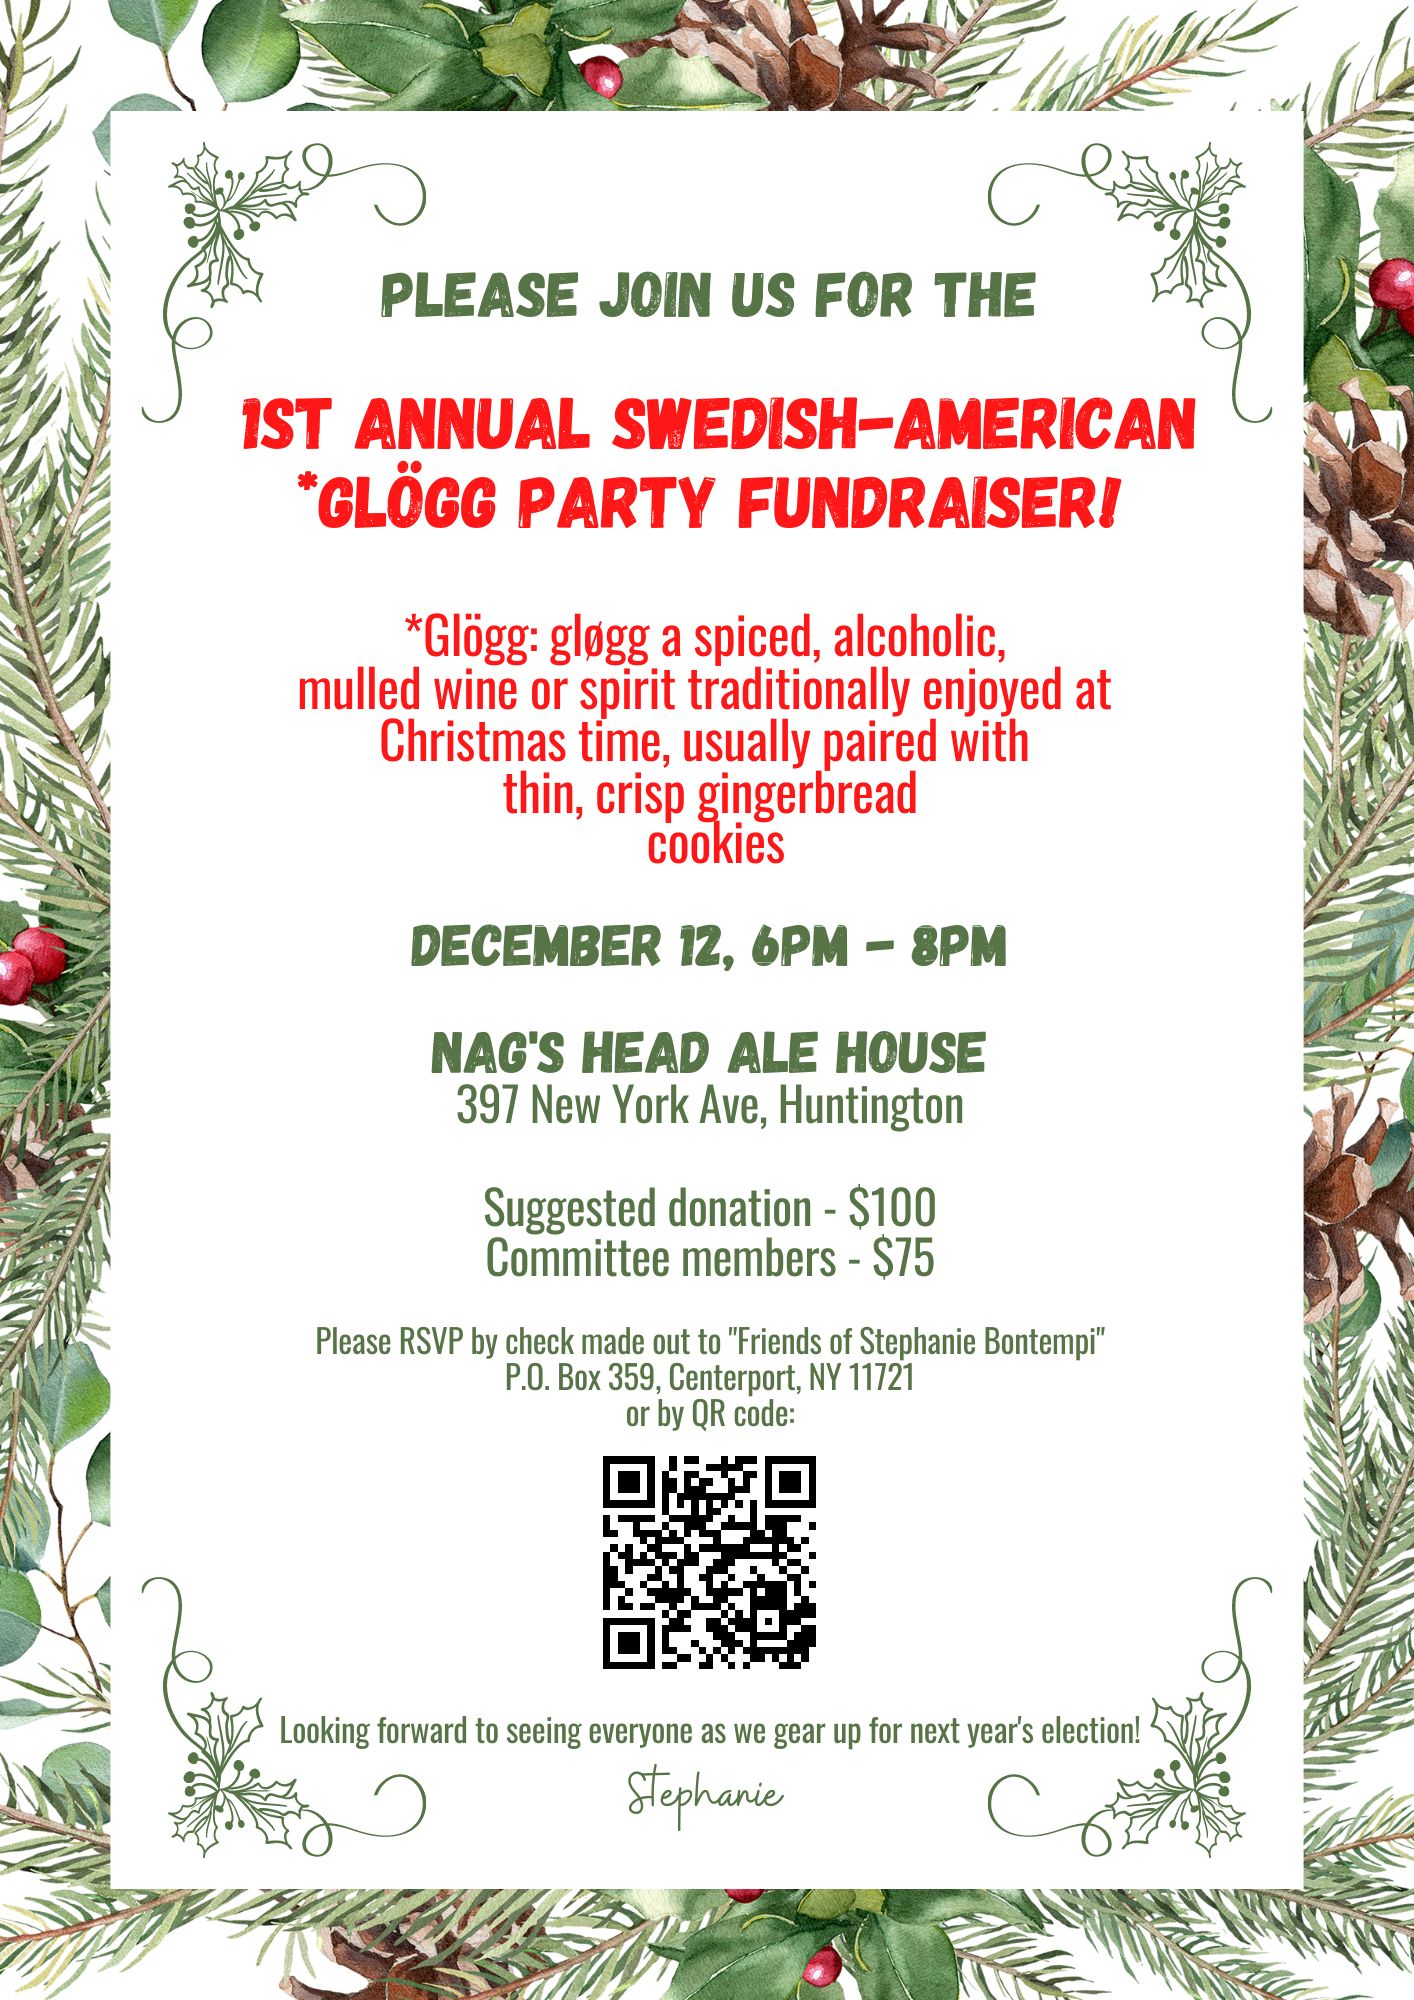 Please join us for the 1st Annual Swedish-American Glogg Party Fundraiser 